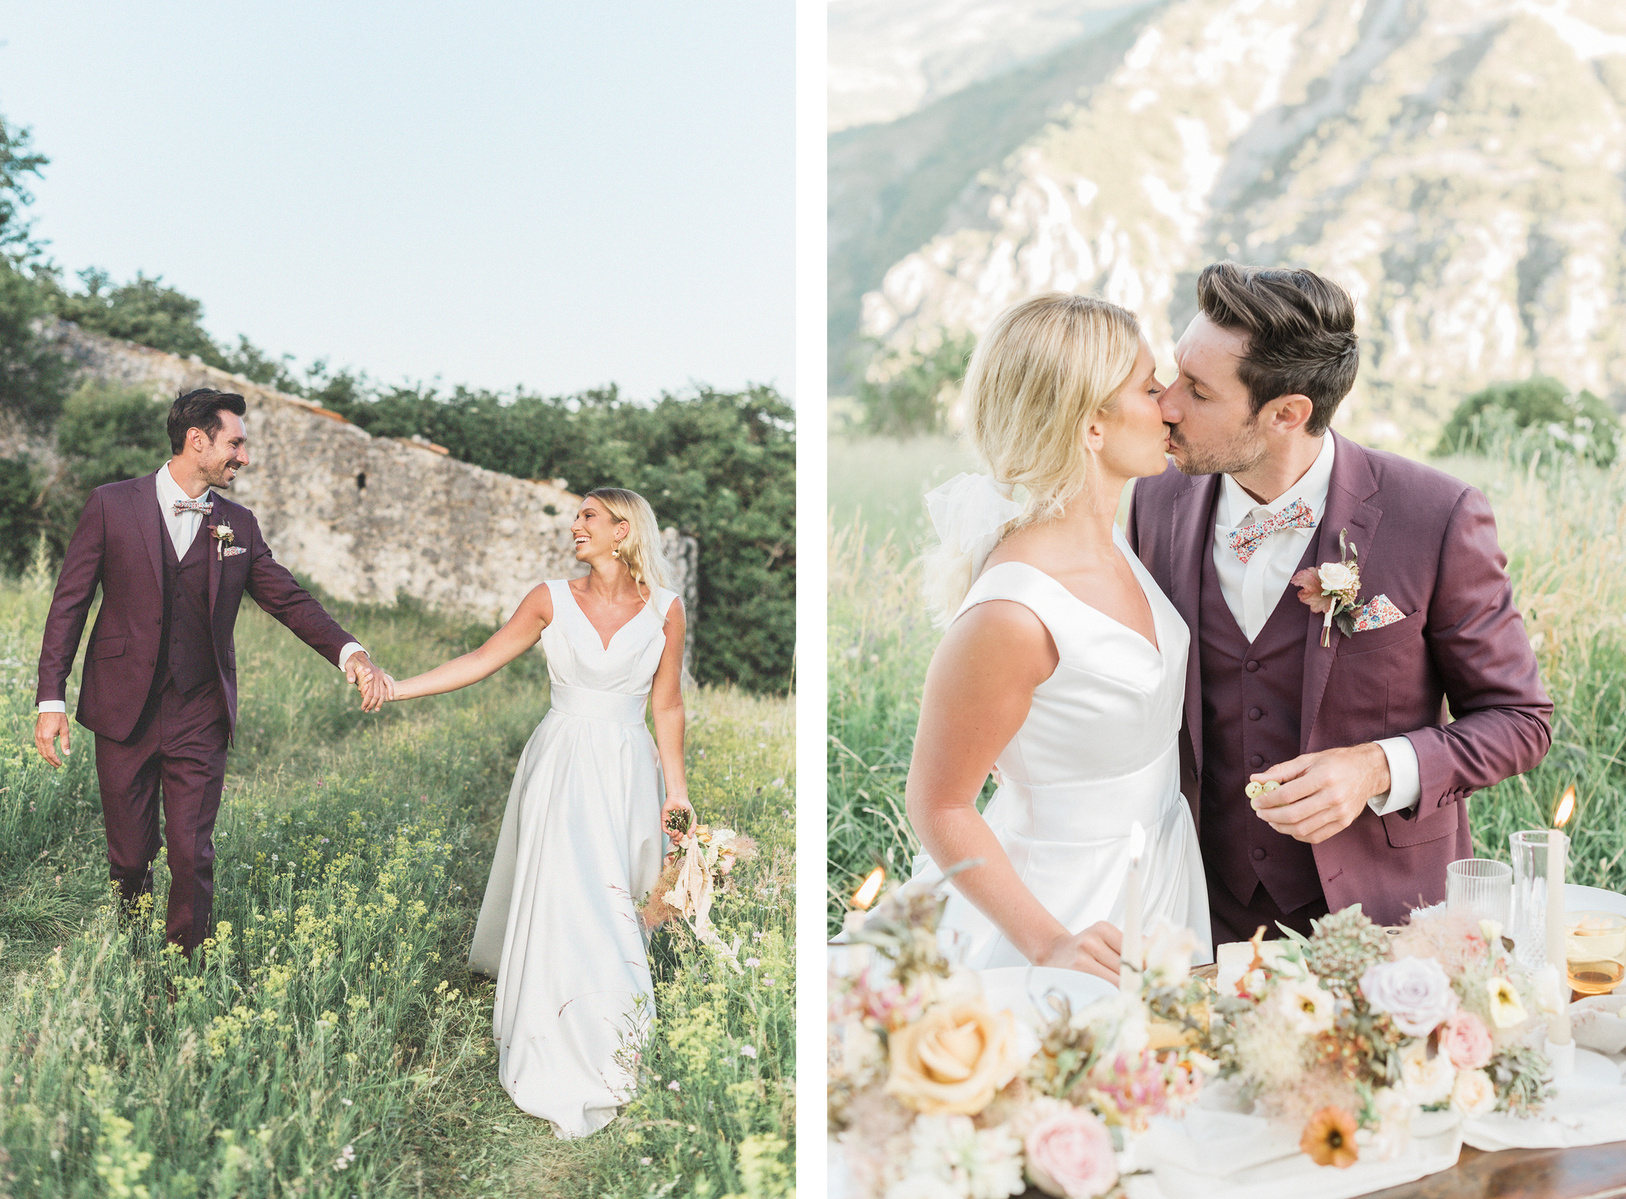 Provence Wedding Planners based in the South of France recommended by Provence wedding photographer Visuals by Abbi. South of France wedding photographer. 